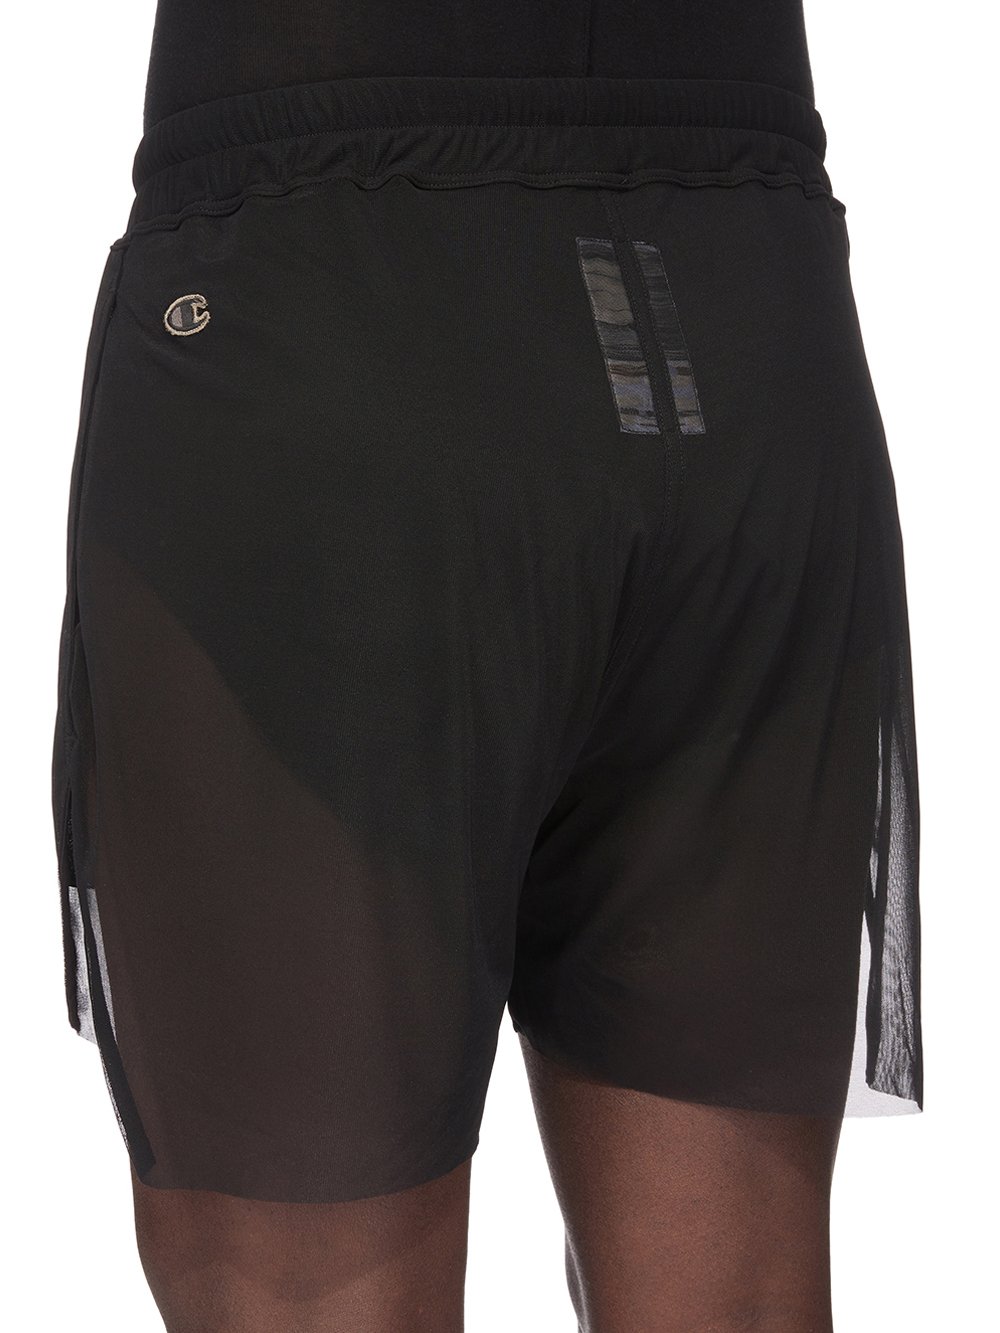 CHAMPION X RICK OWENS DOLPHIN BOXERS IN BLACK RECYCLED NYLON MICROMESH